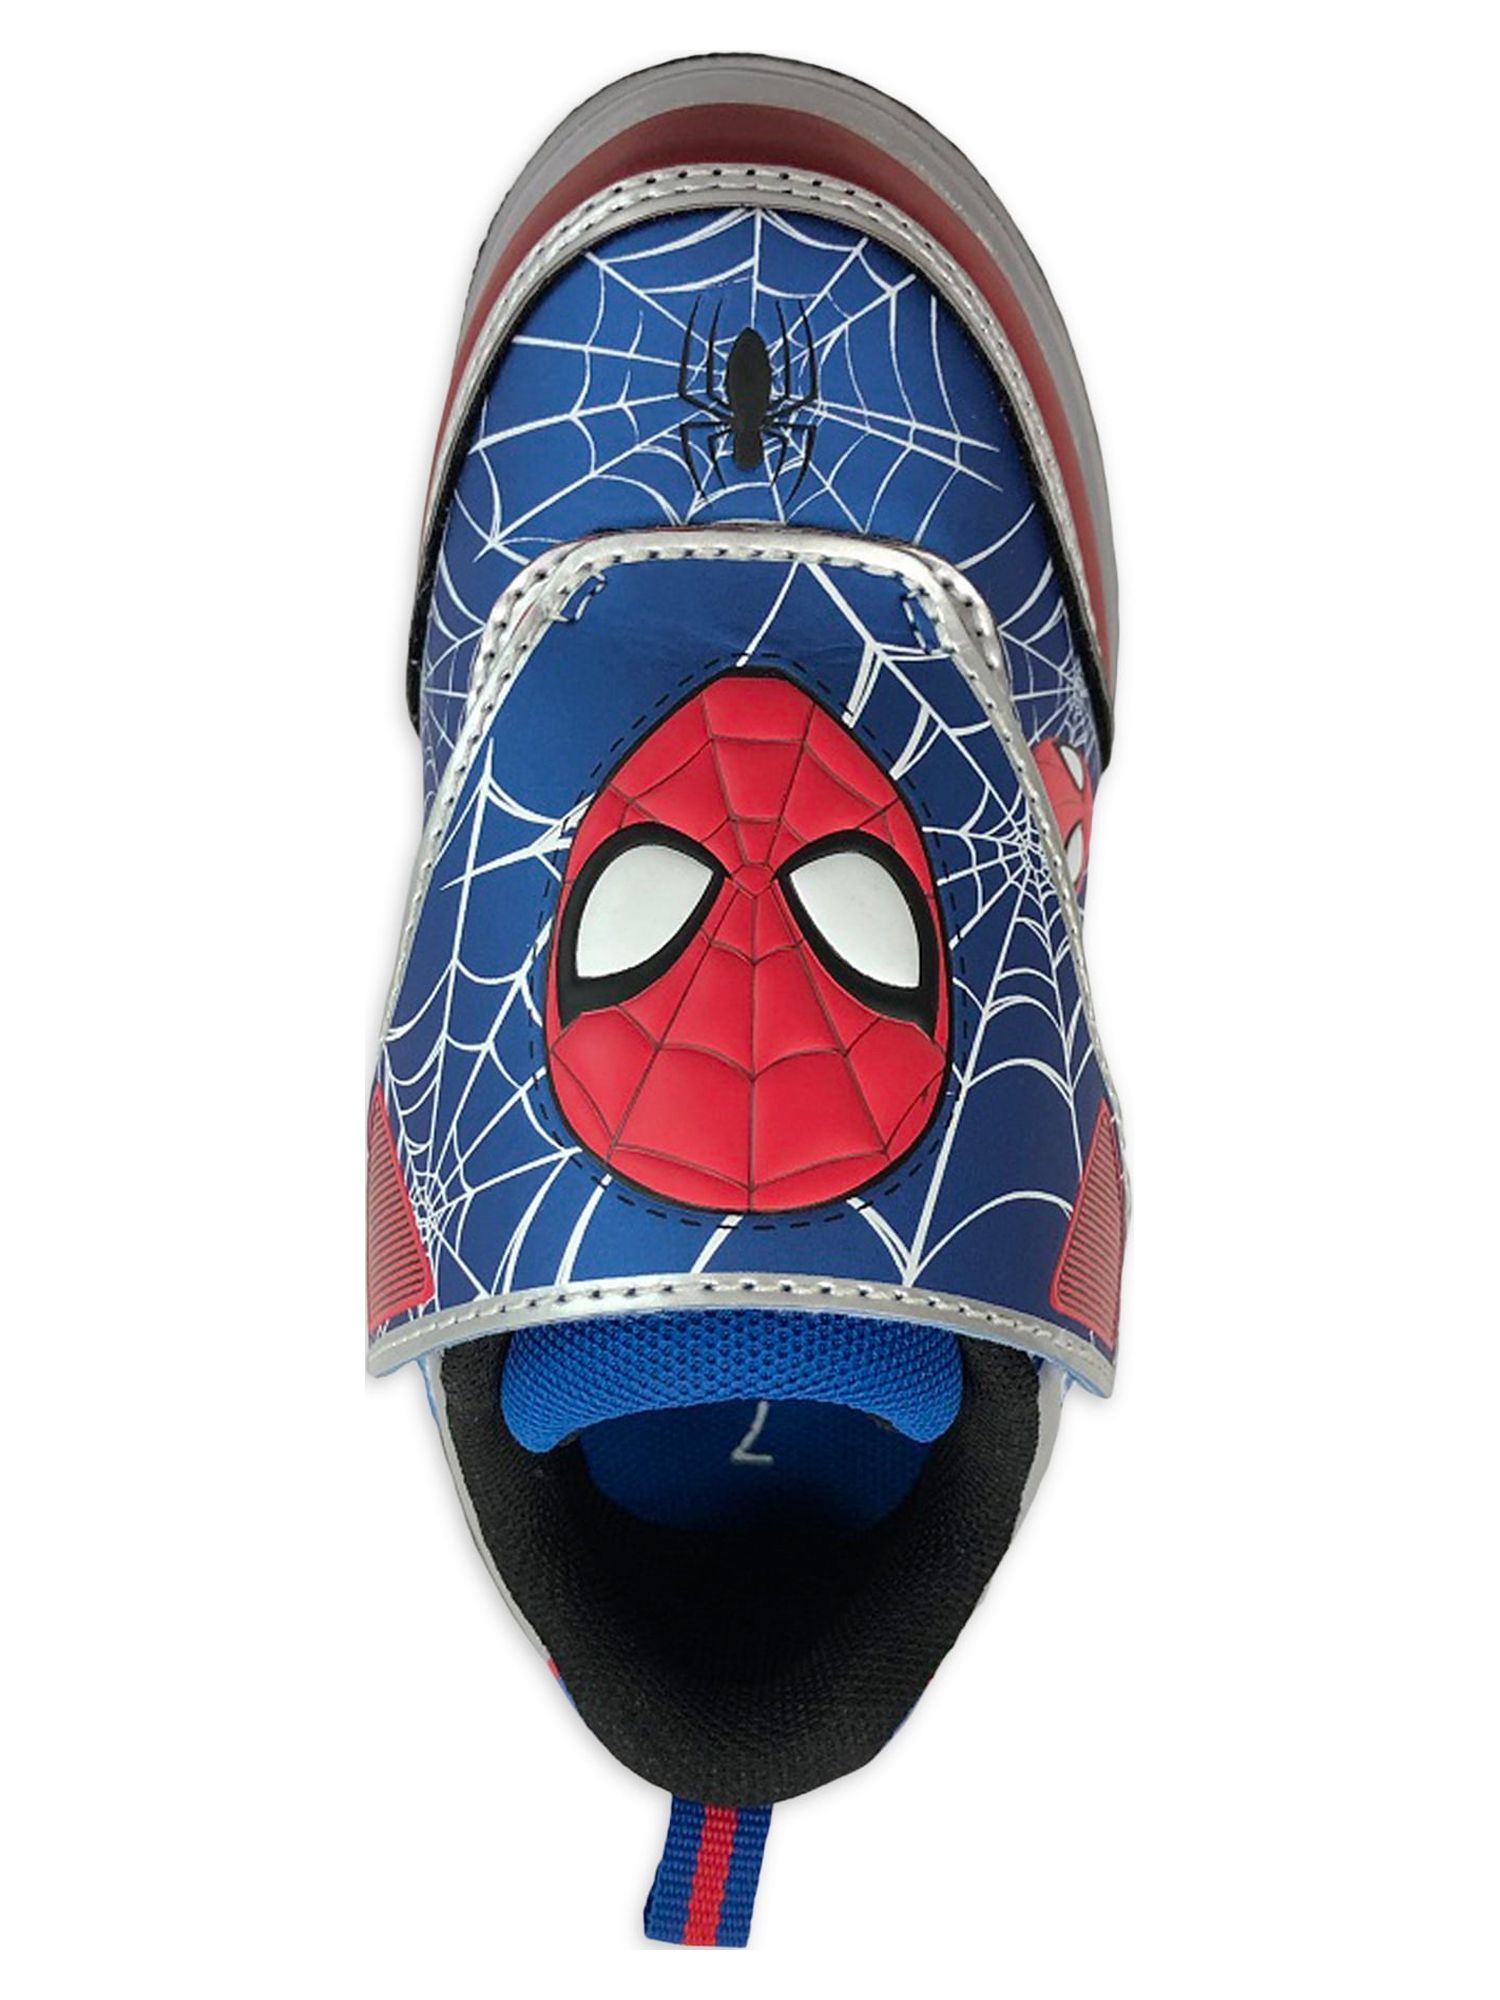 Spider-Man Toddler Boys License Light Up Casual Shoe, Sizes 7-13 - image 4 of 7